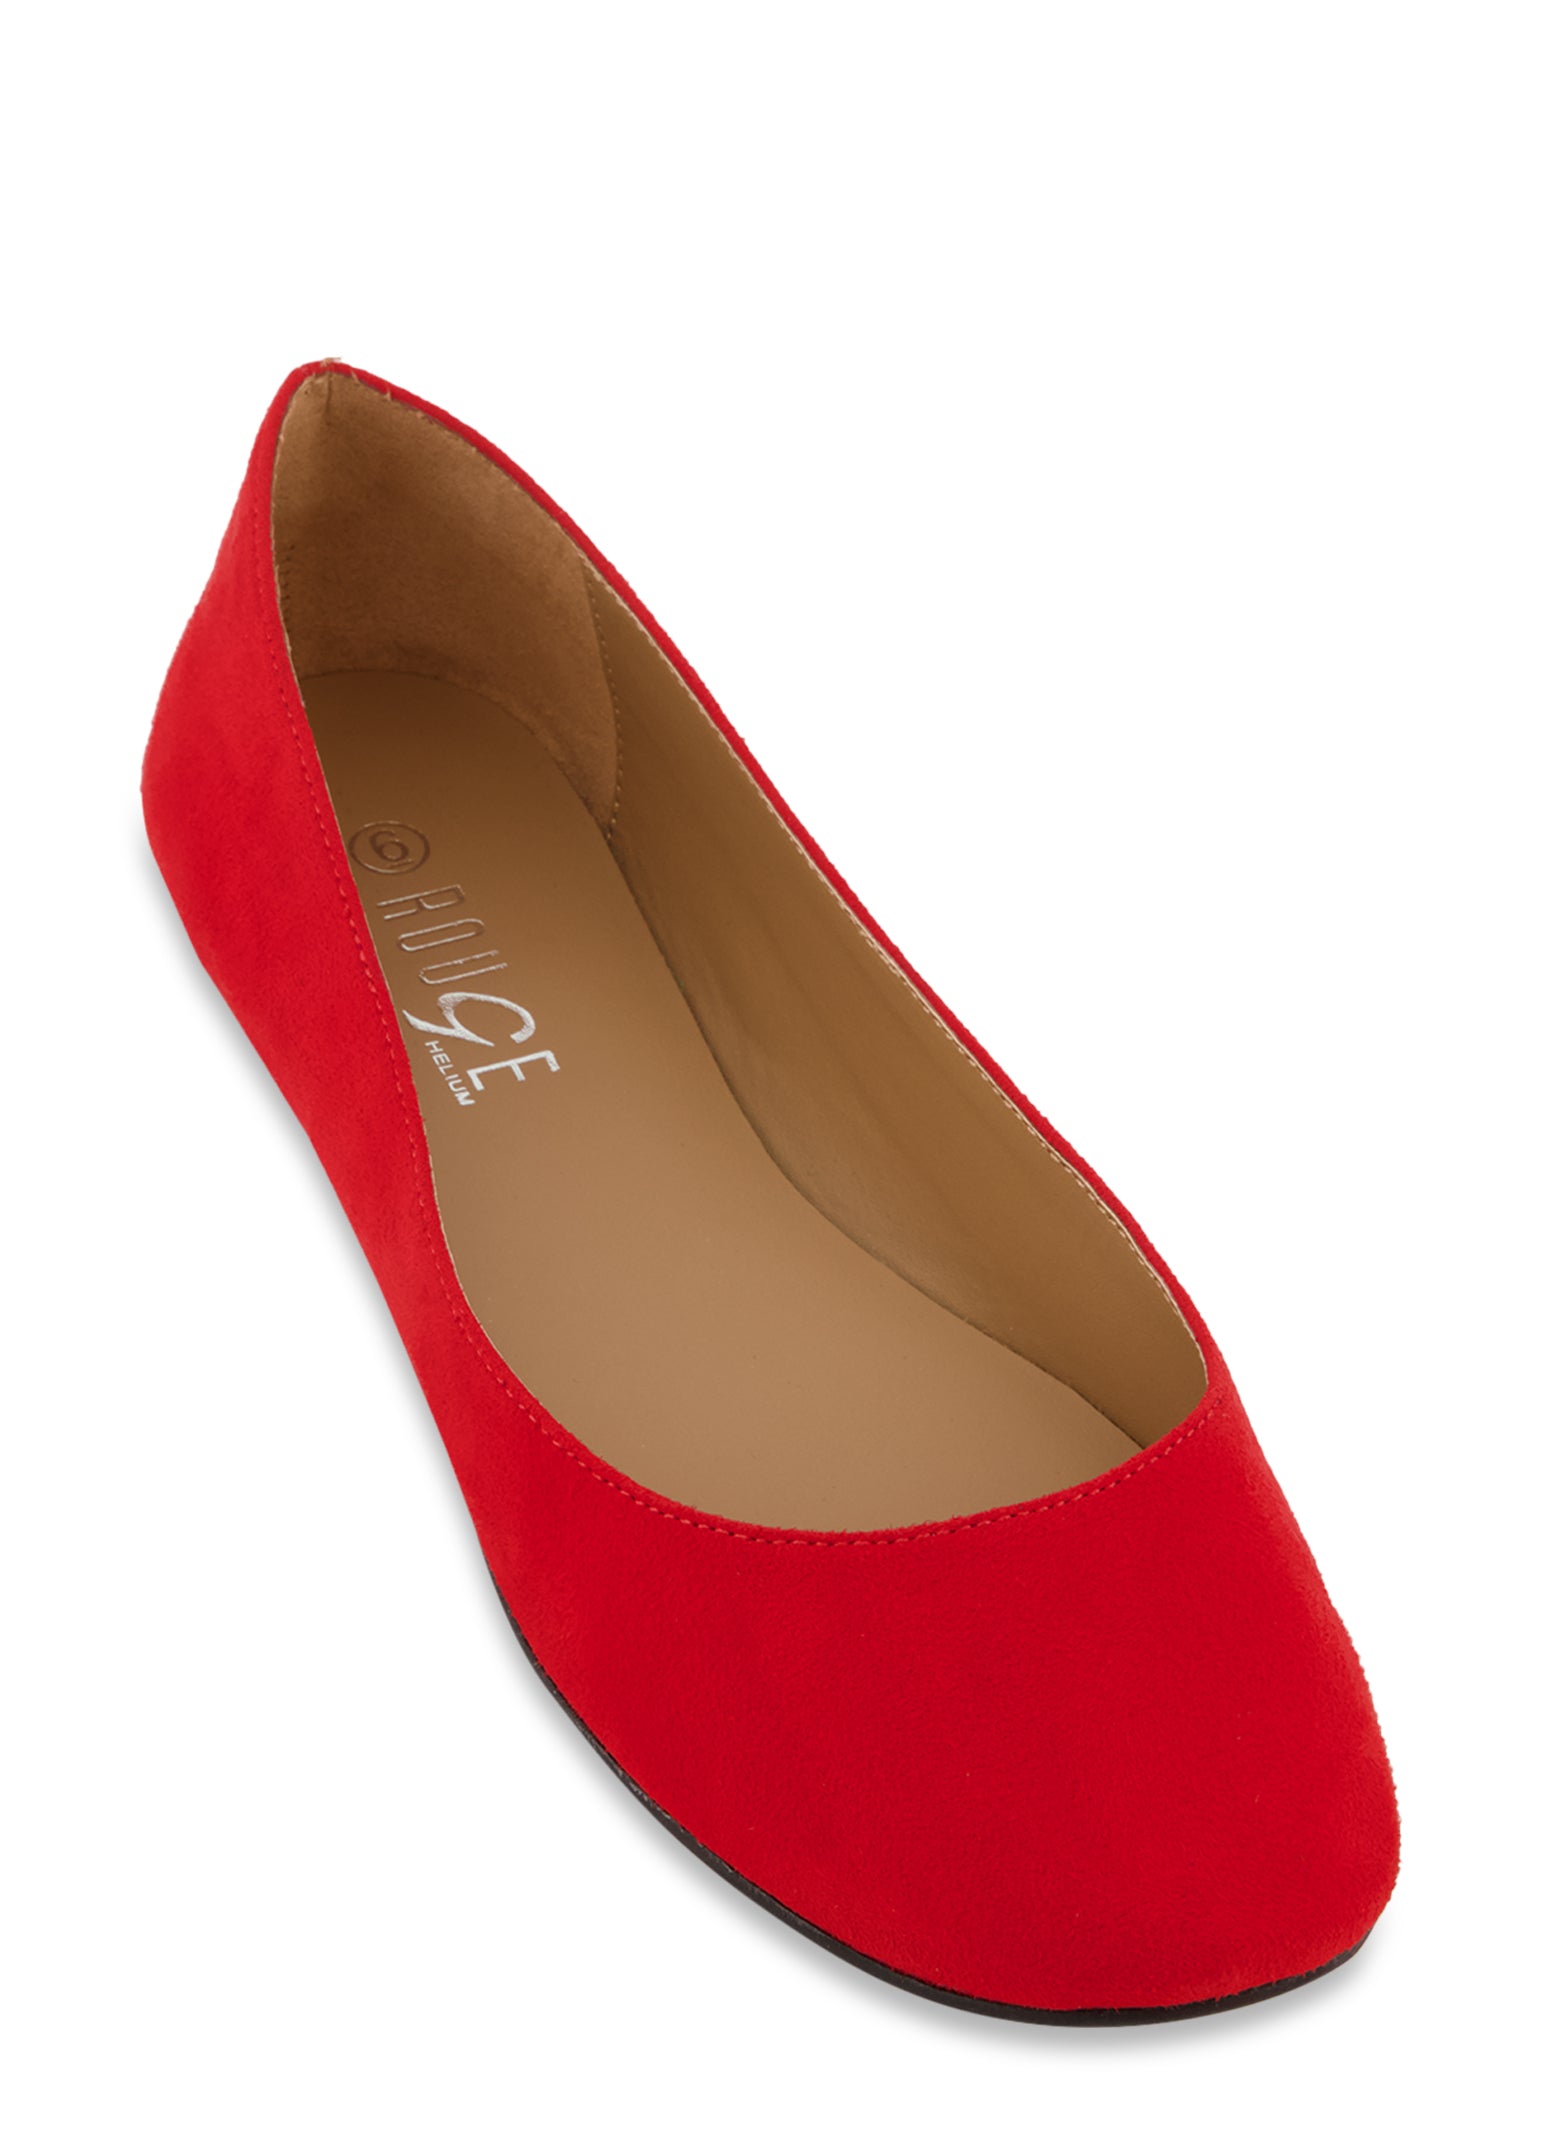 Womens Red Shoes | Everyday Low Prices | Rainbow